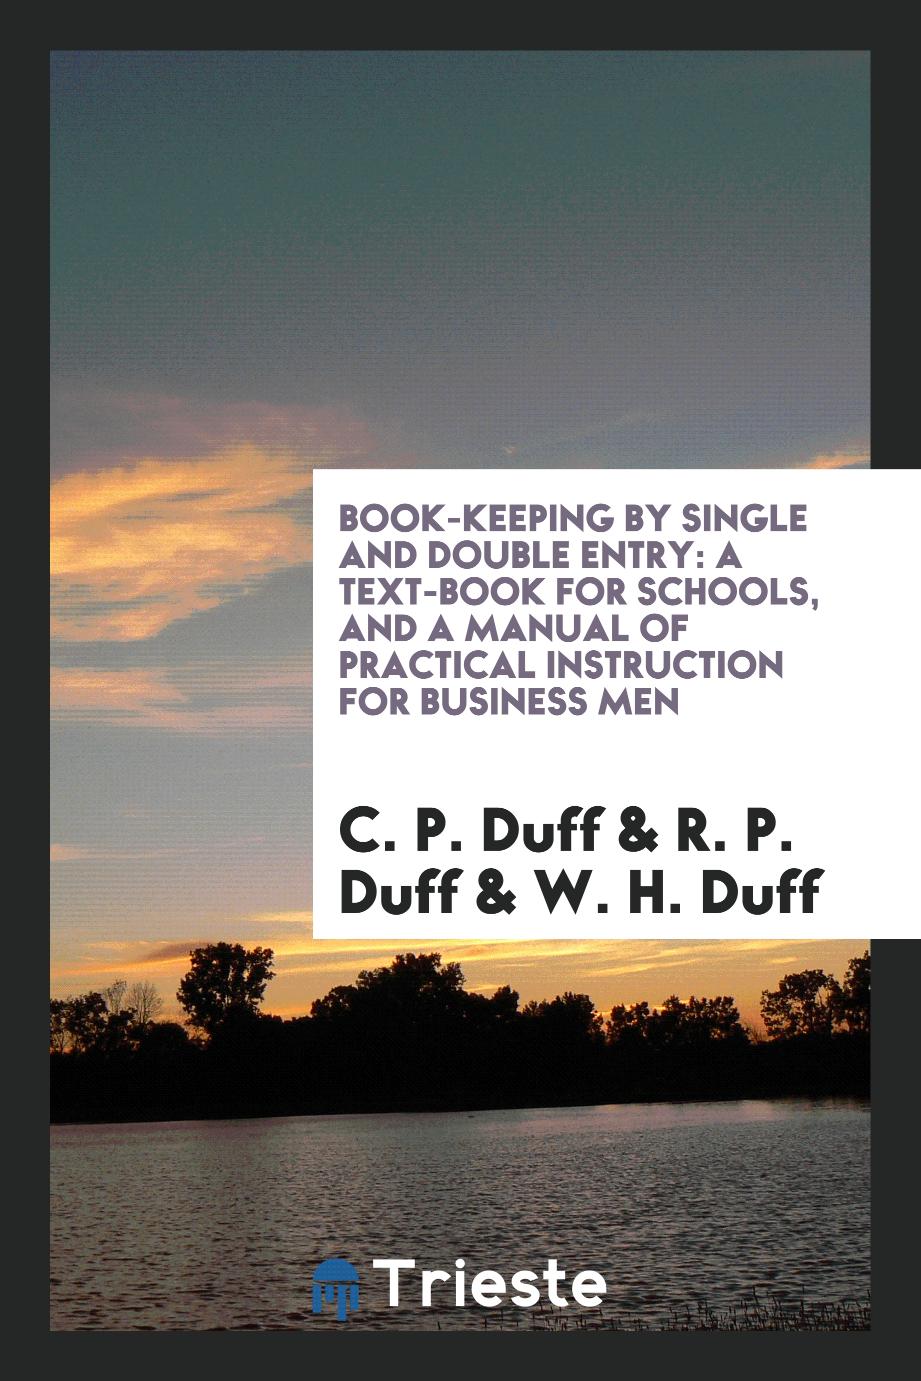 Book-keeping by single and double entry: a text-book for schools, and a manual of practical instruction for business men